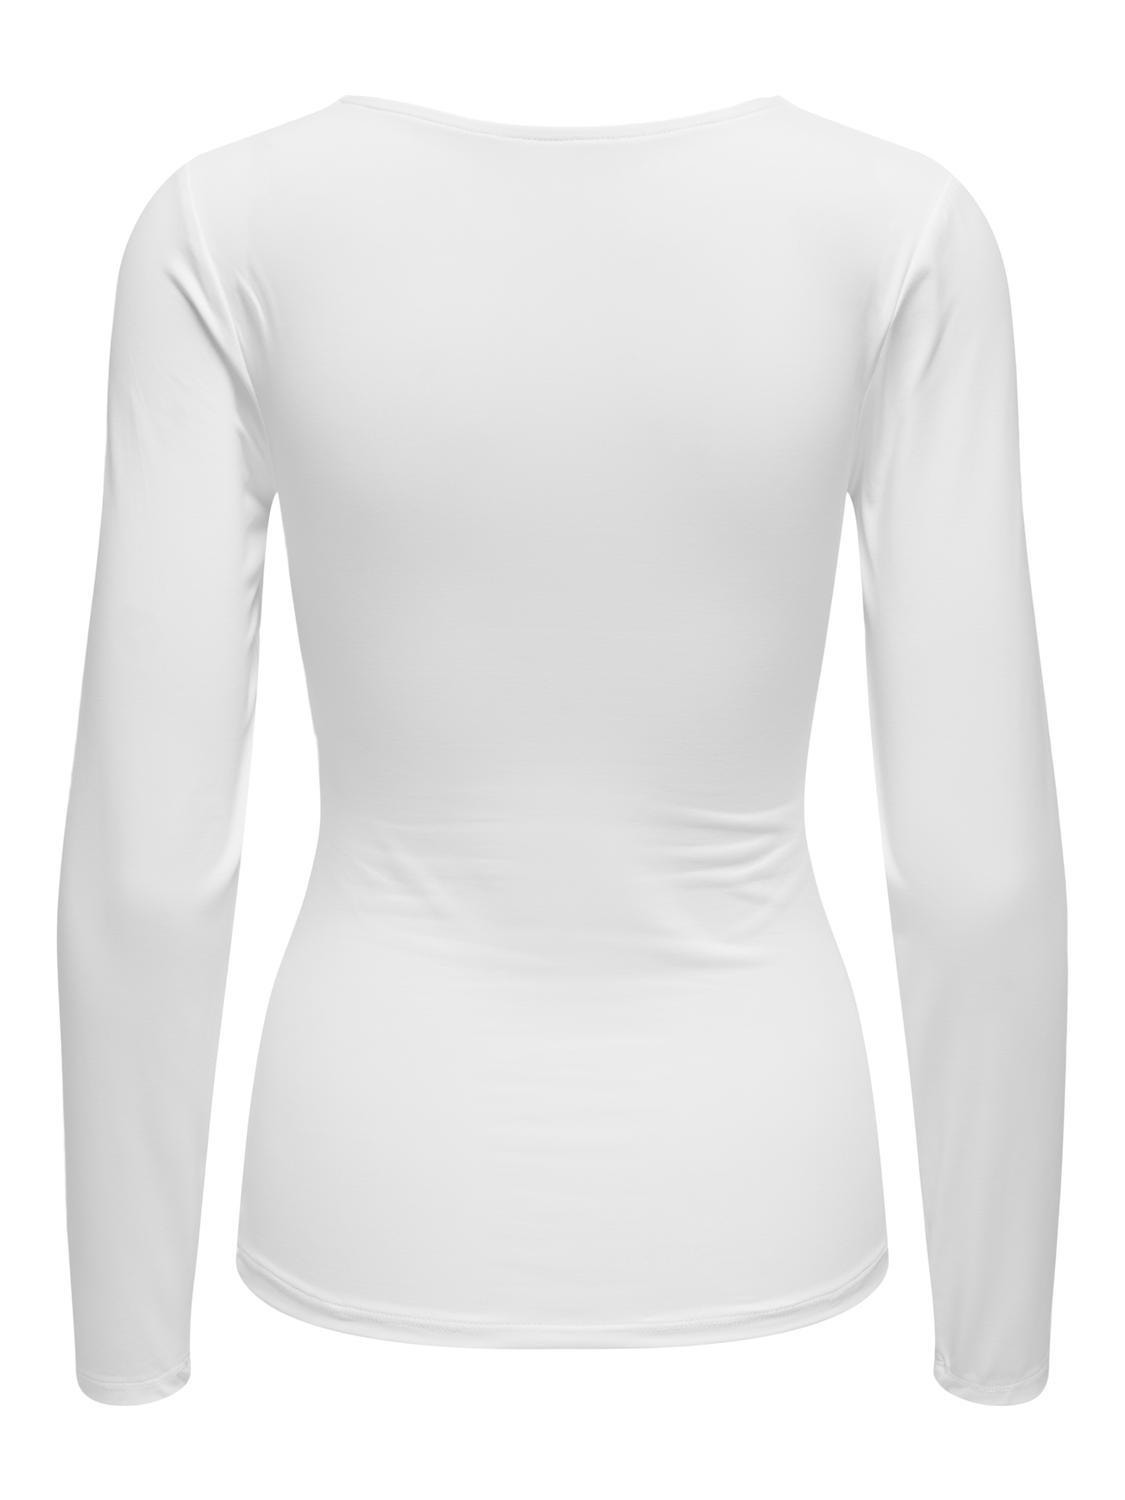 ONLY Square neck rib top -Bright White - 15302647